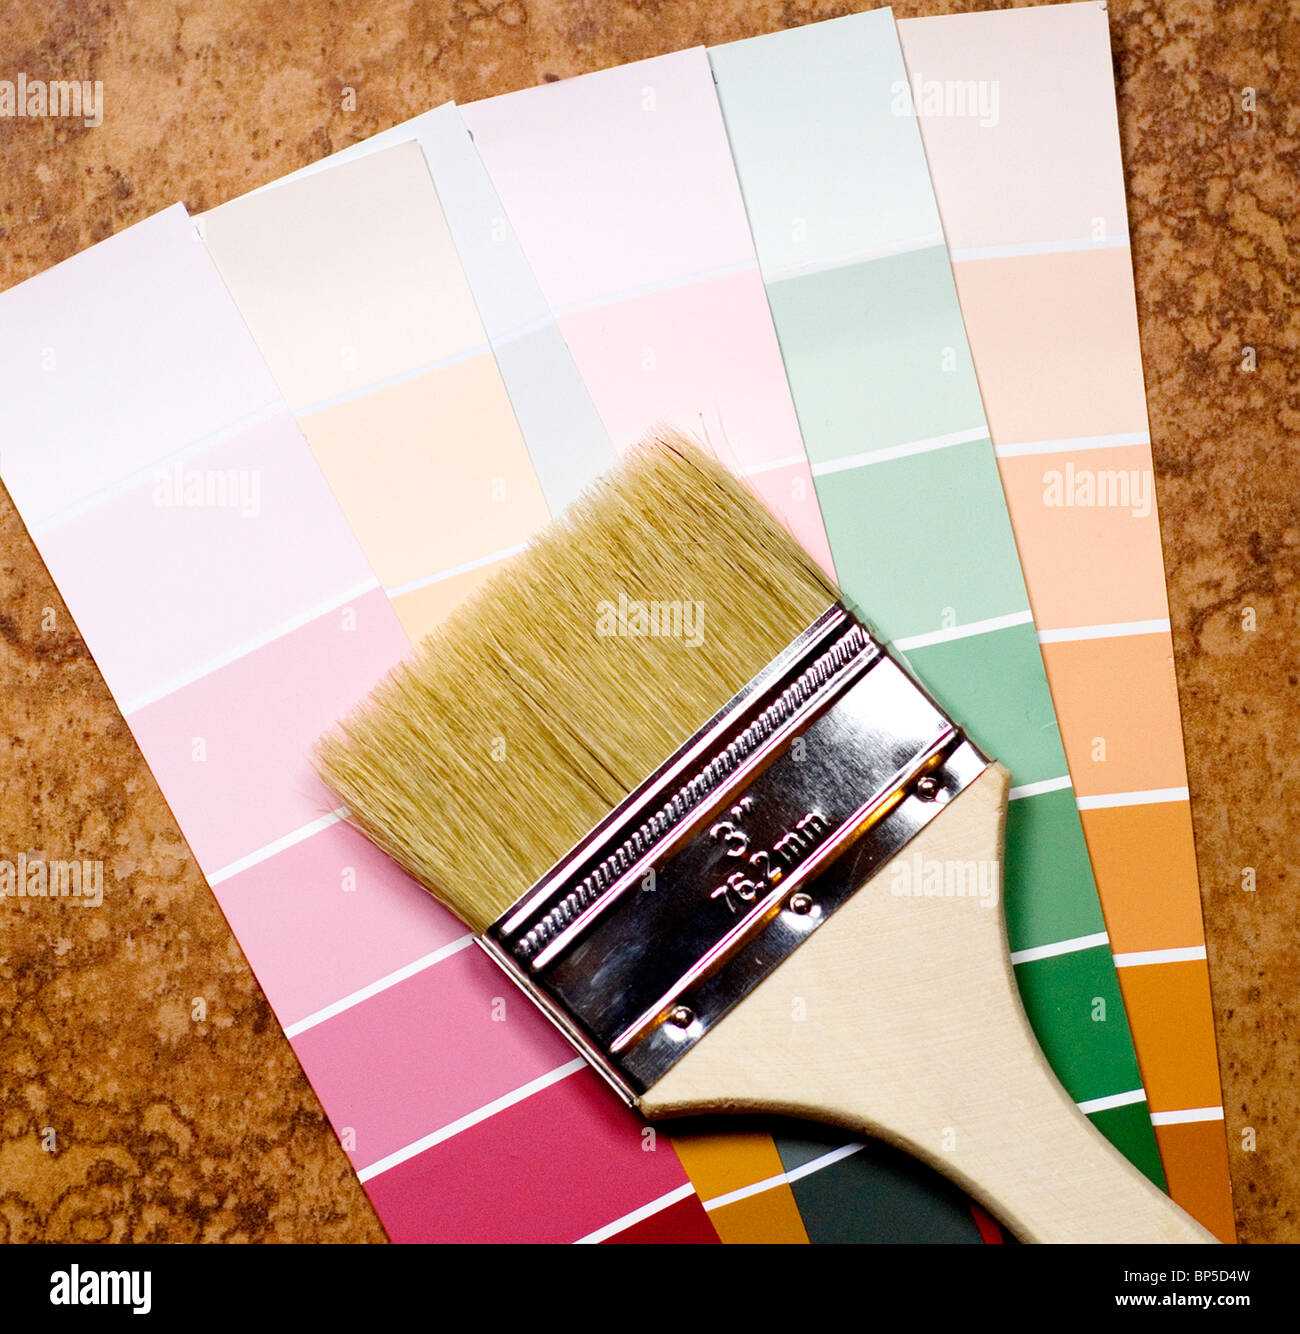 Paintbrush and paint samples Stock Photo